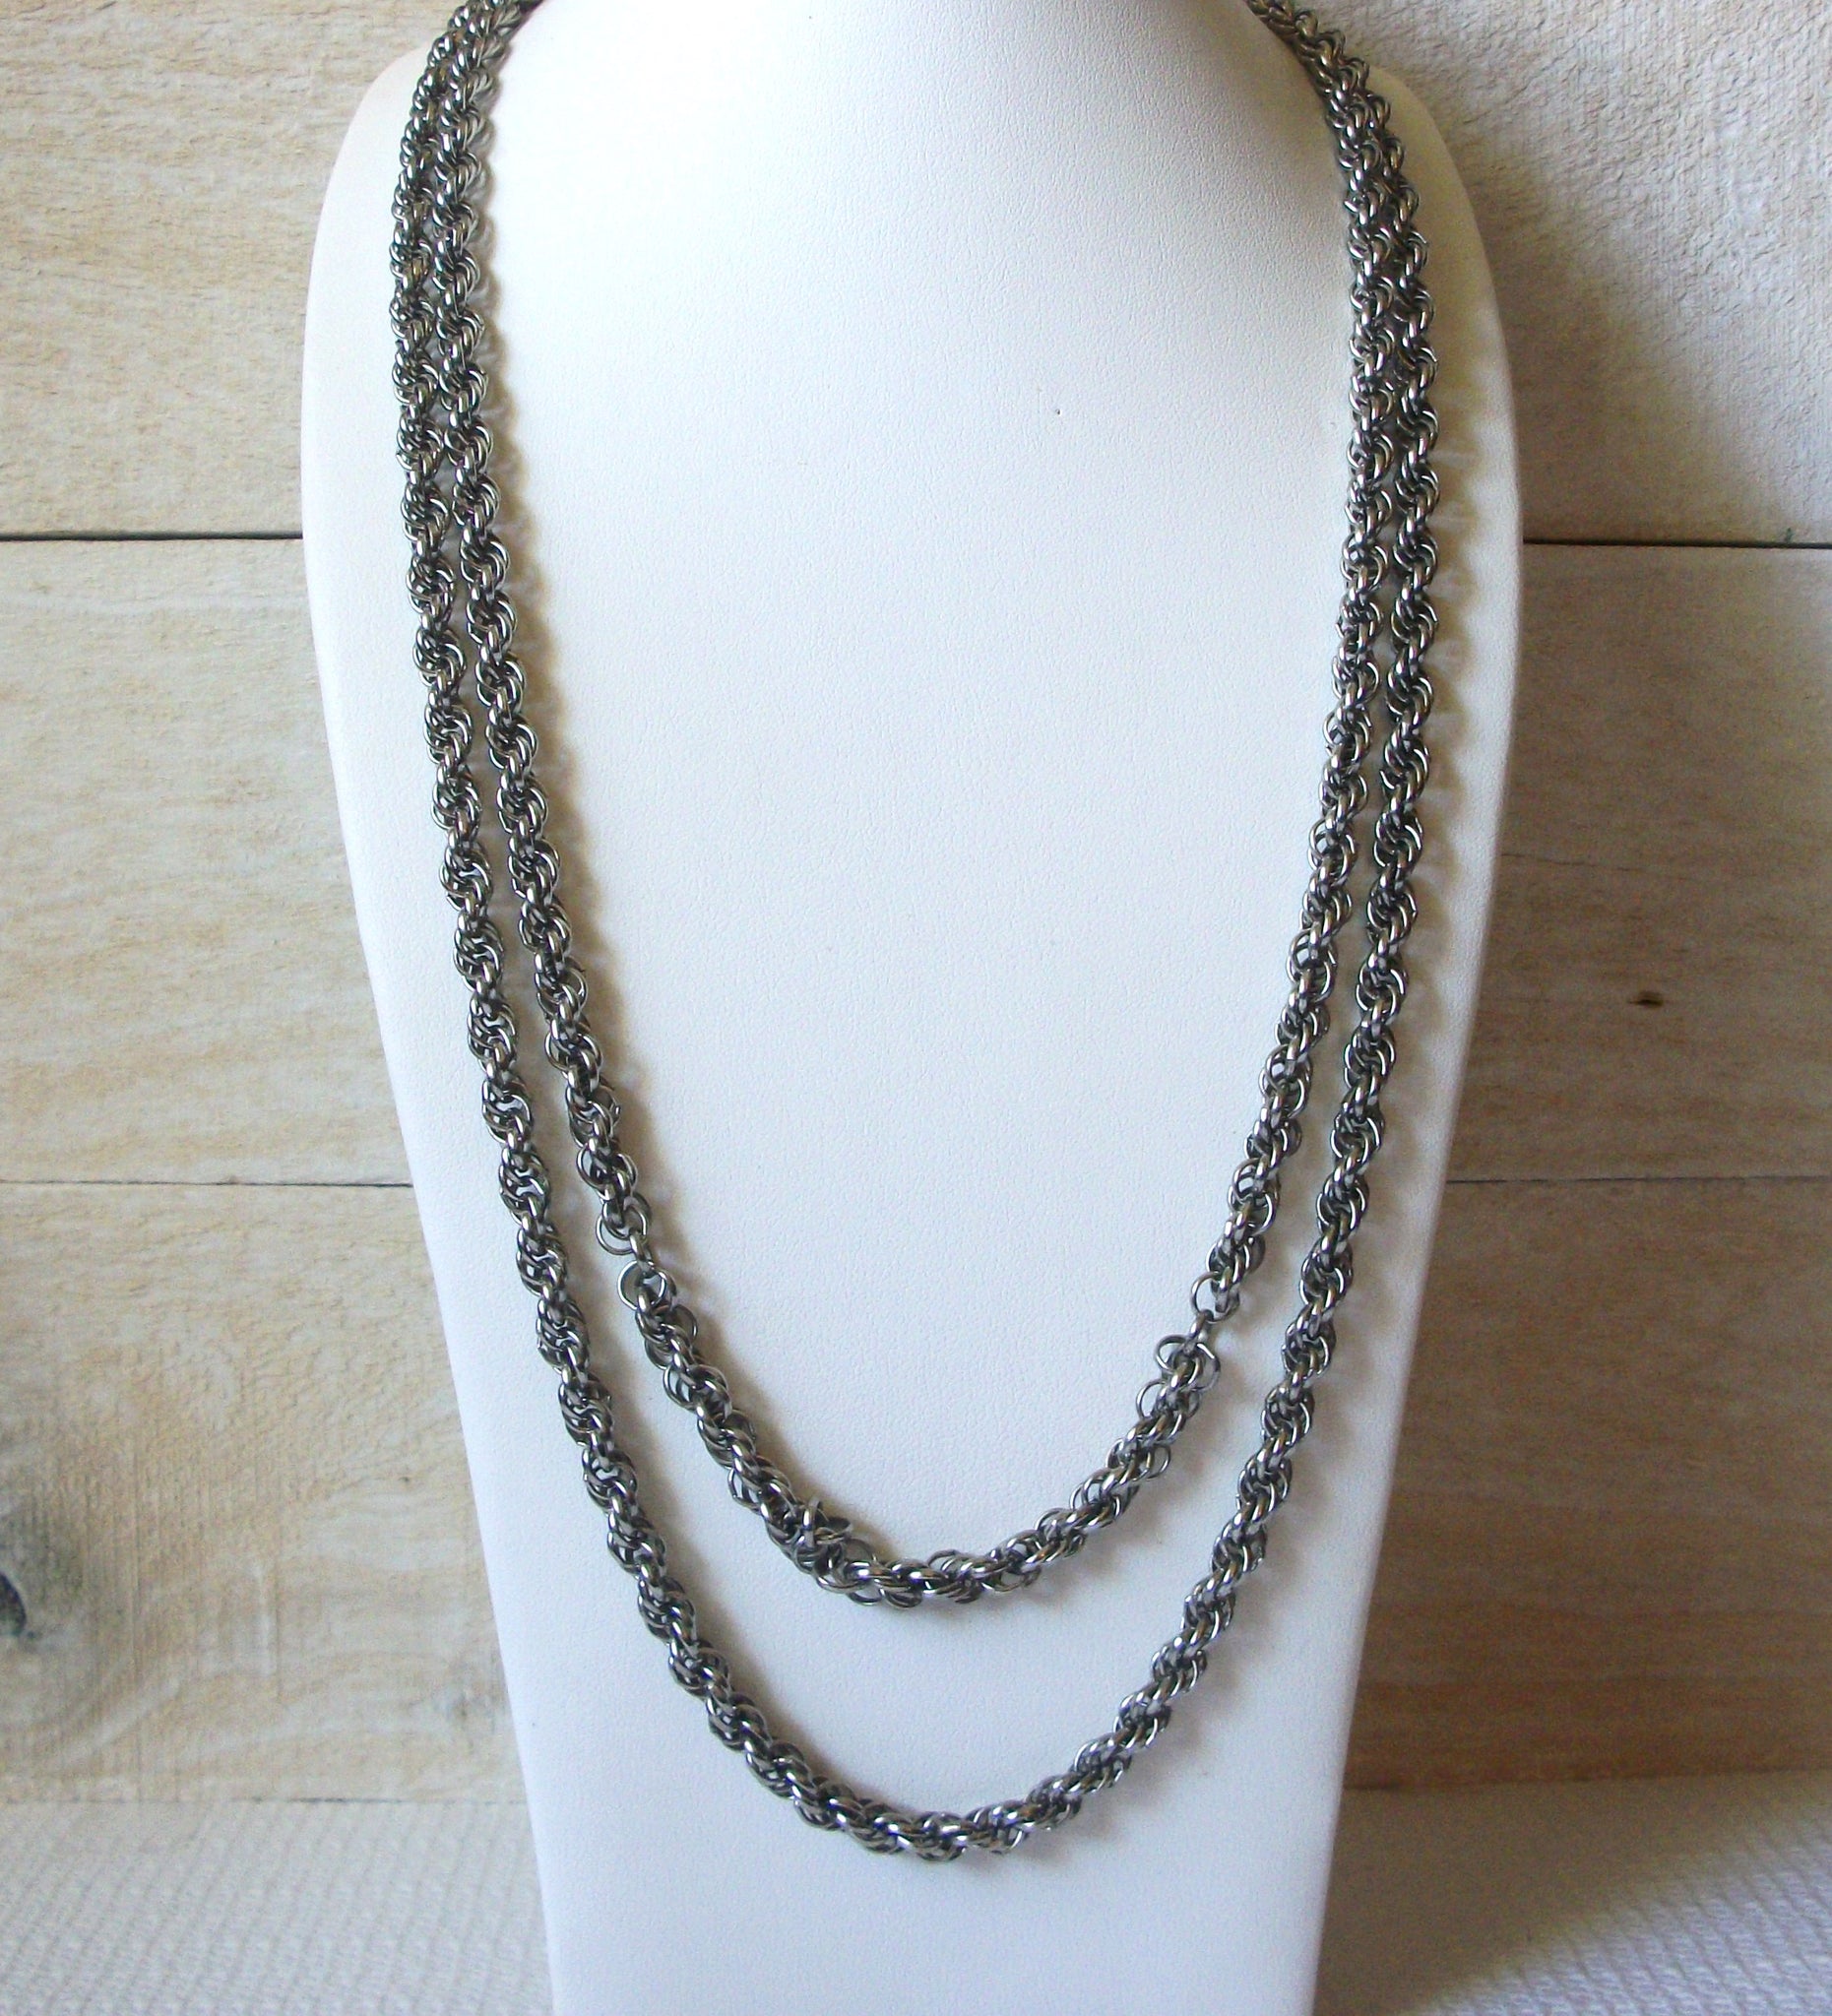 1960s Vintage Silver Toned Necklace 42520